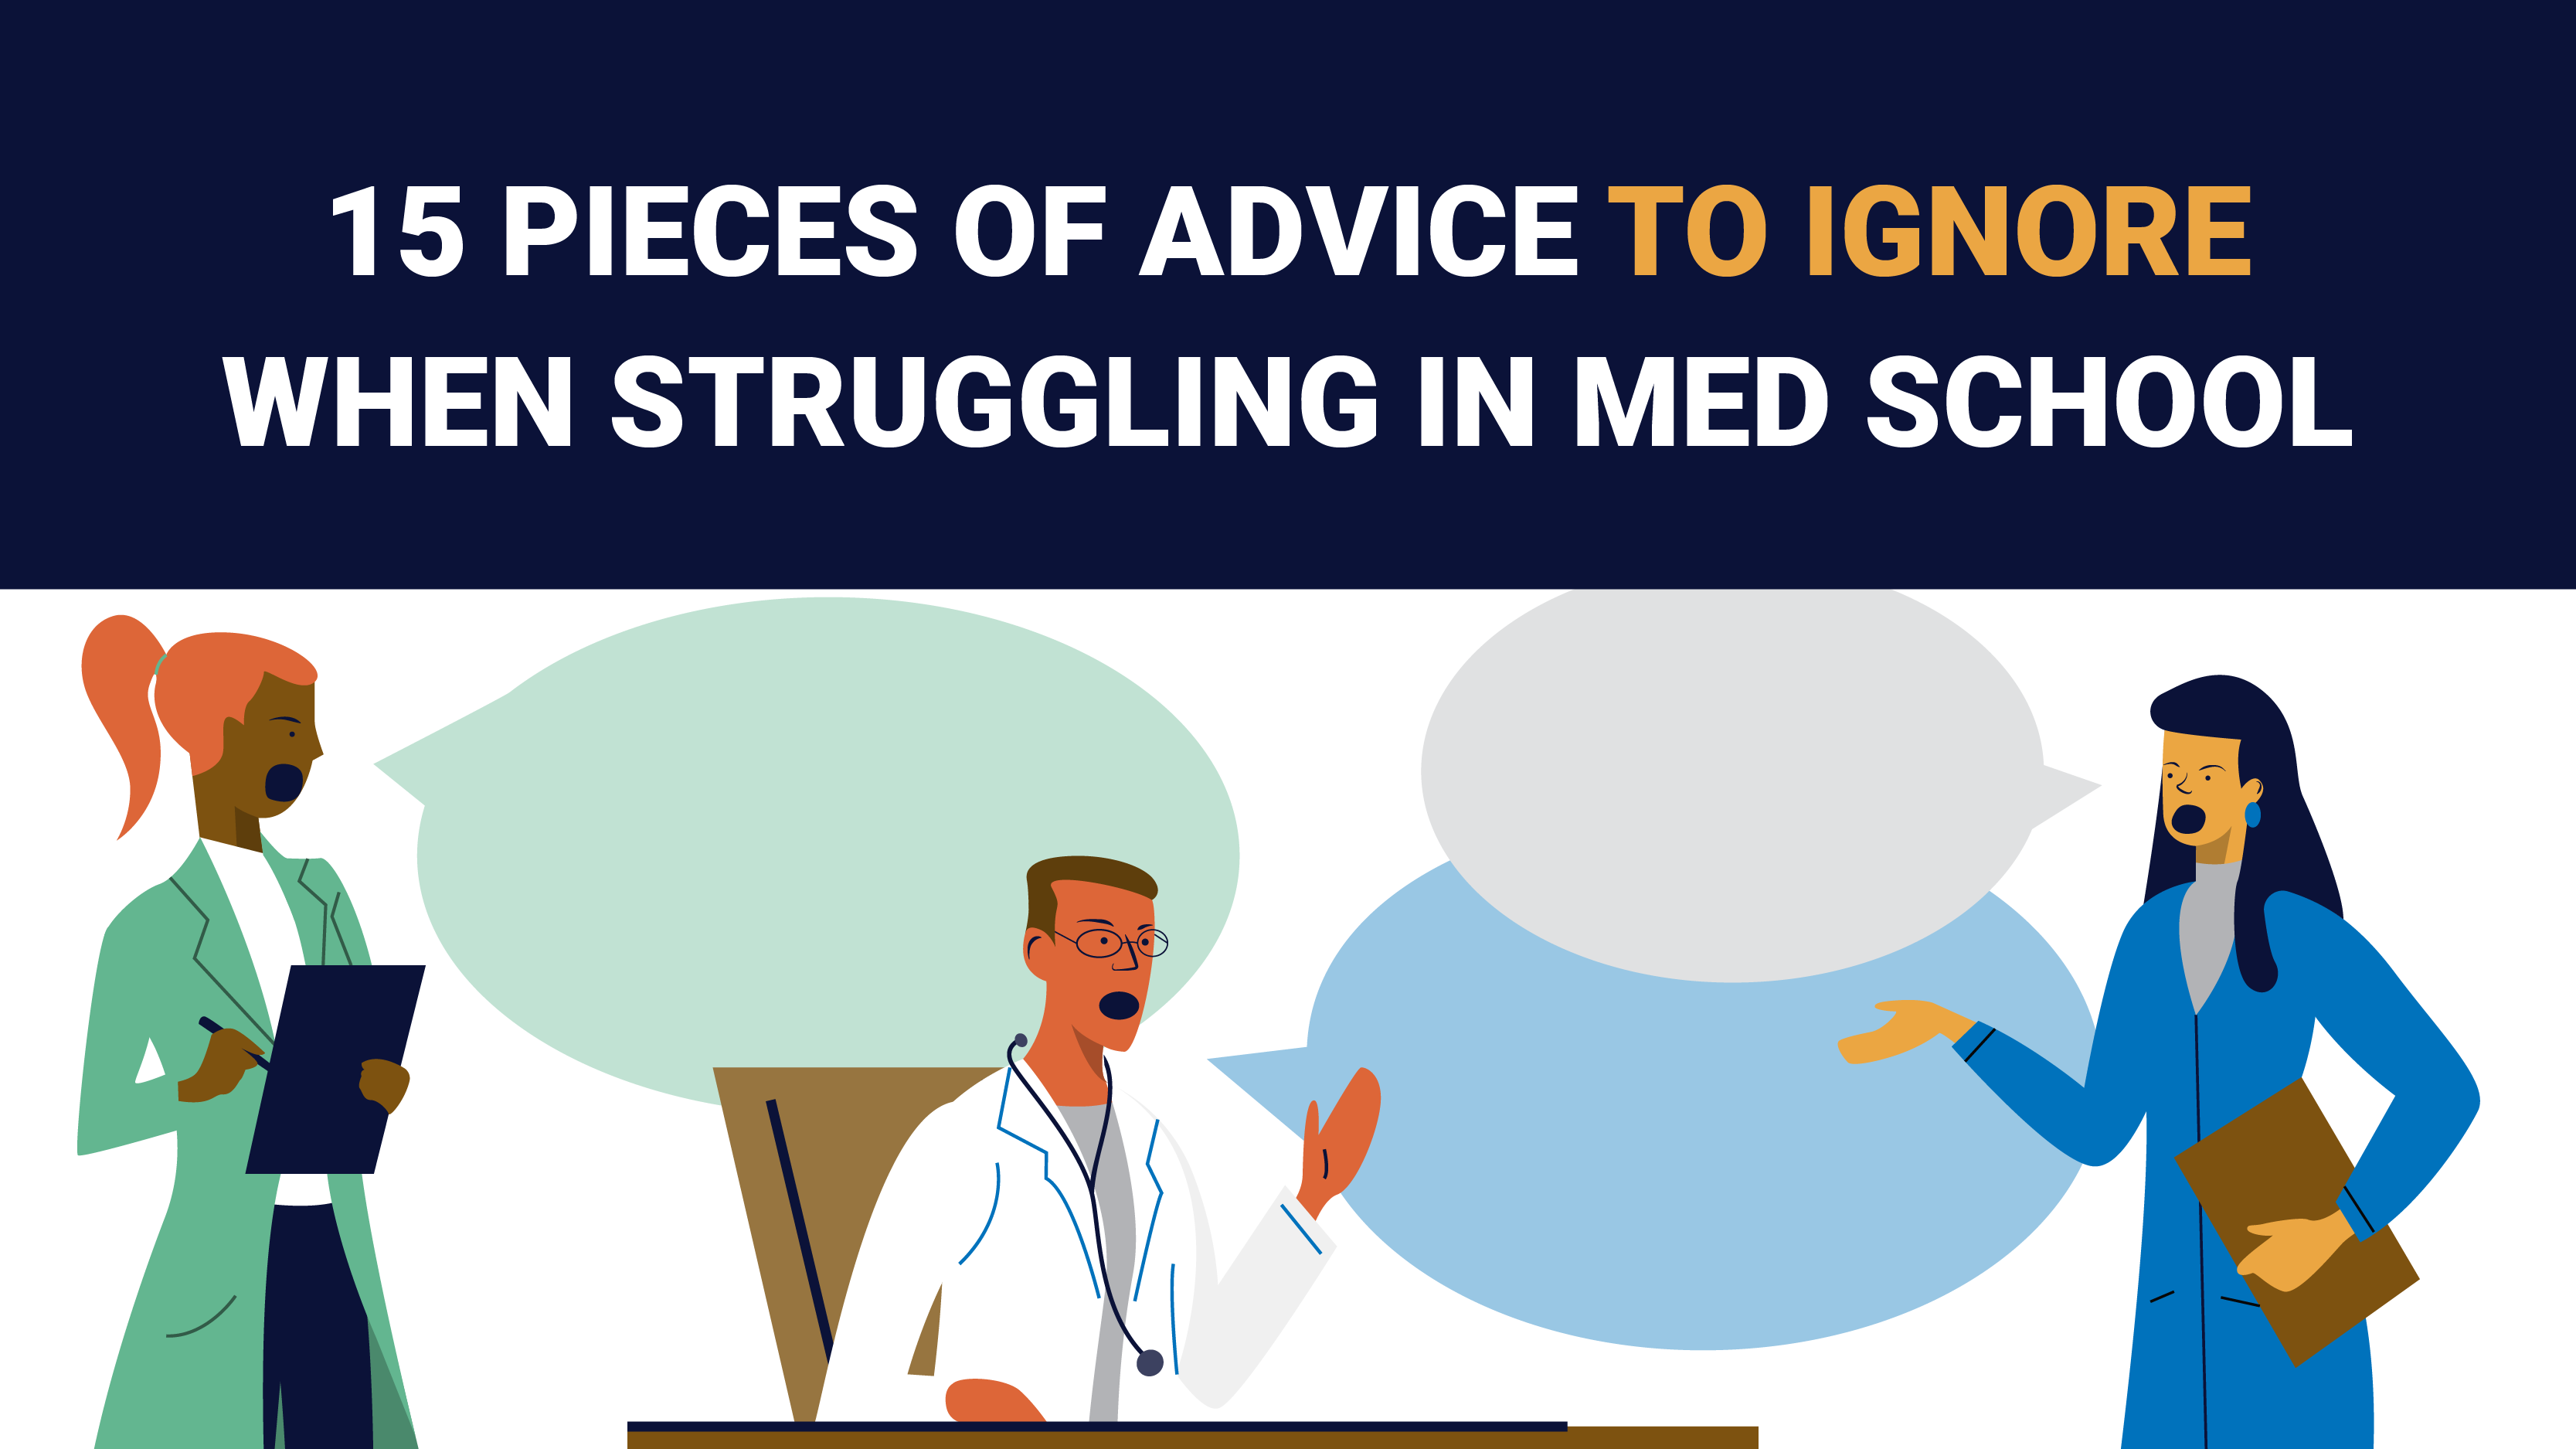 Featured image for “15 Pieces of Advice to Ignore when Struggling in Med School”